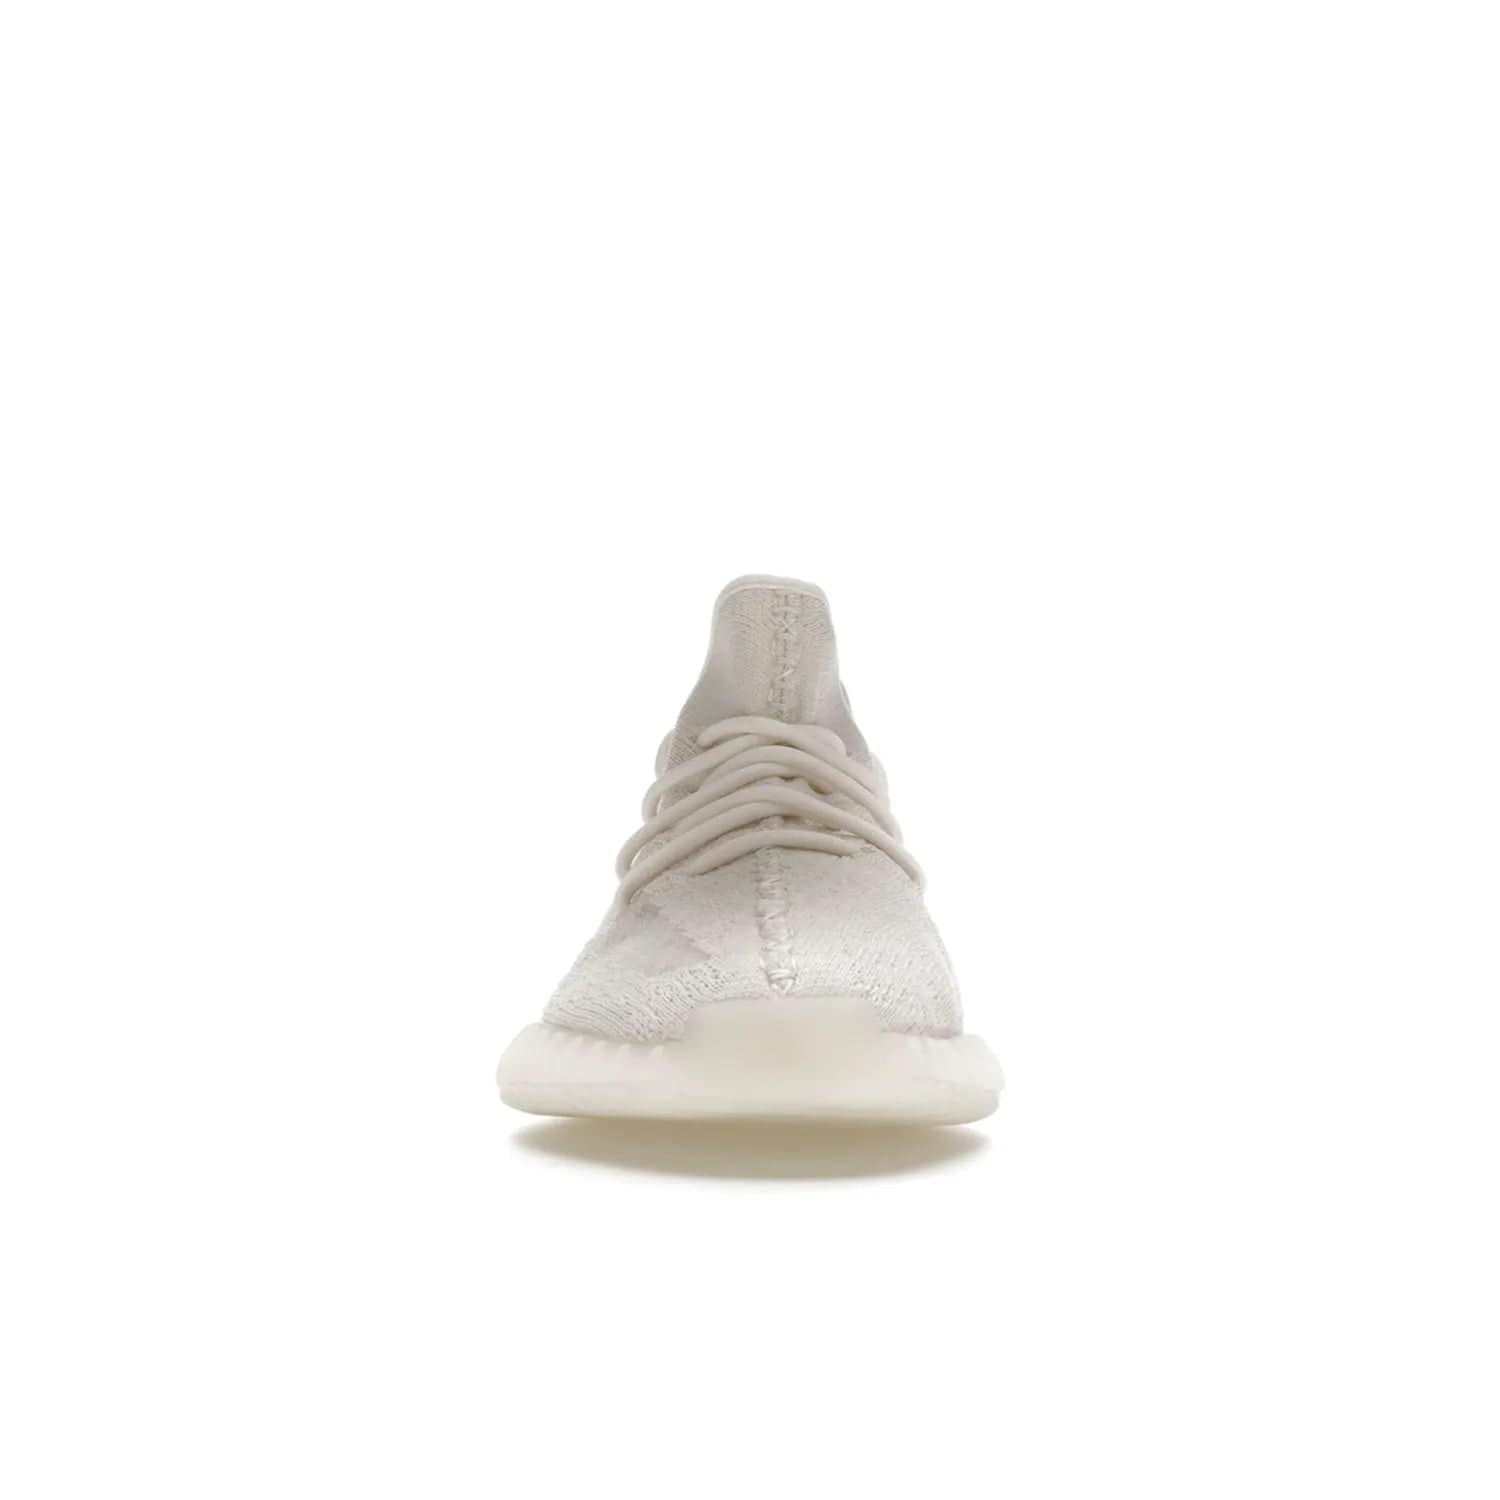 adidas Yeezy Boost 350 V2 Bone - Image 10 - Only at www.BallersClubKickz.com - Grab the stylish and comfortable adidas Yeezy Boost 350 V2 Bone in March 2022. This sneaker features a triple white Primeknit upper, mesh side stripes and canvas heel tabs, sitting atop a semi-translucent sole with Boost technology. Sure to keep your feet comfortable and stylish!